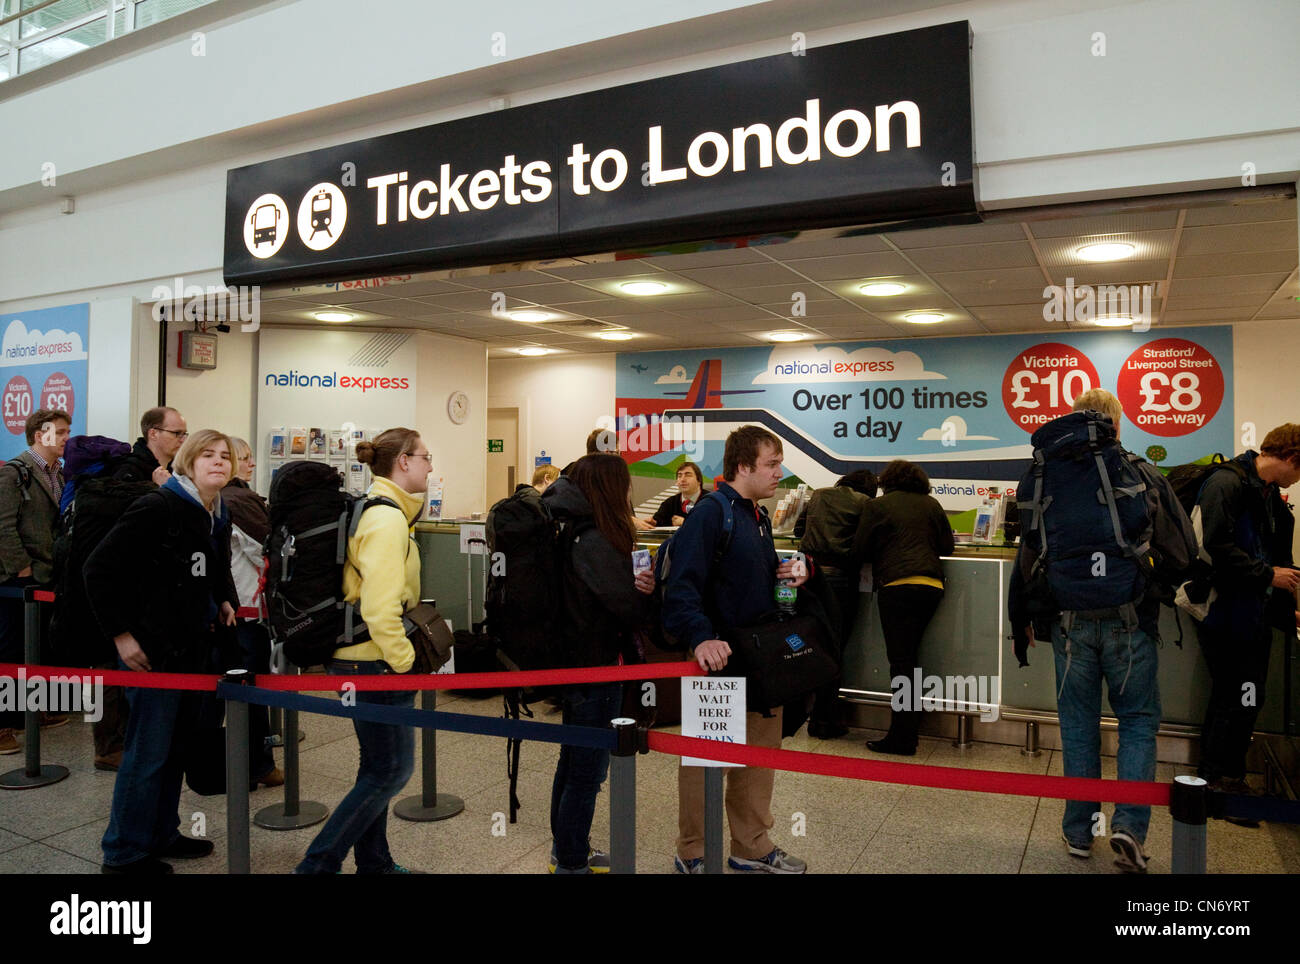 Air travellers arriving at Stansted airport queue for tickets to London, Stansted airport Essex UK Stock Photo